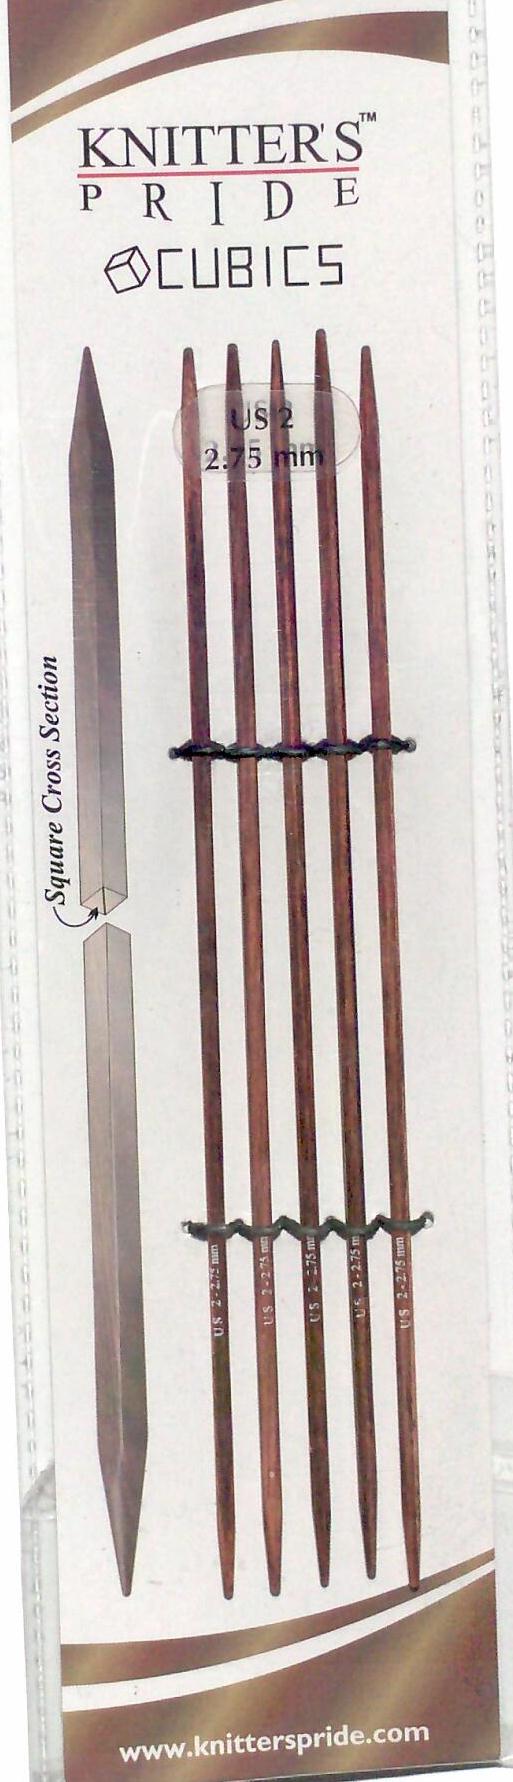 Knitter's Pride 06"/15 cm 4.00 mm/US 6 Rosewood Cubics Double Point Needles